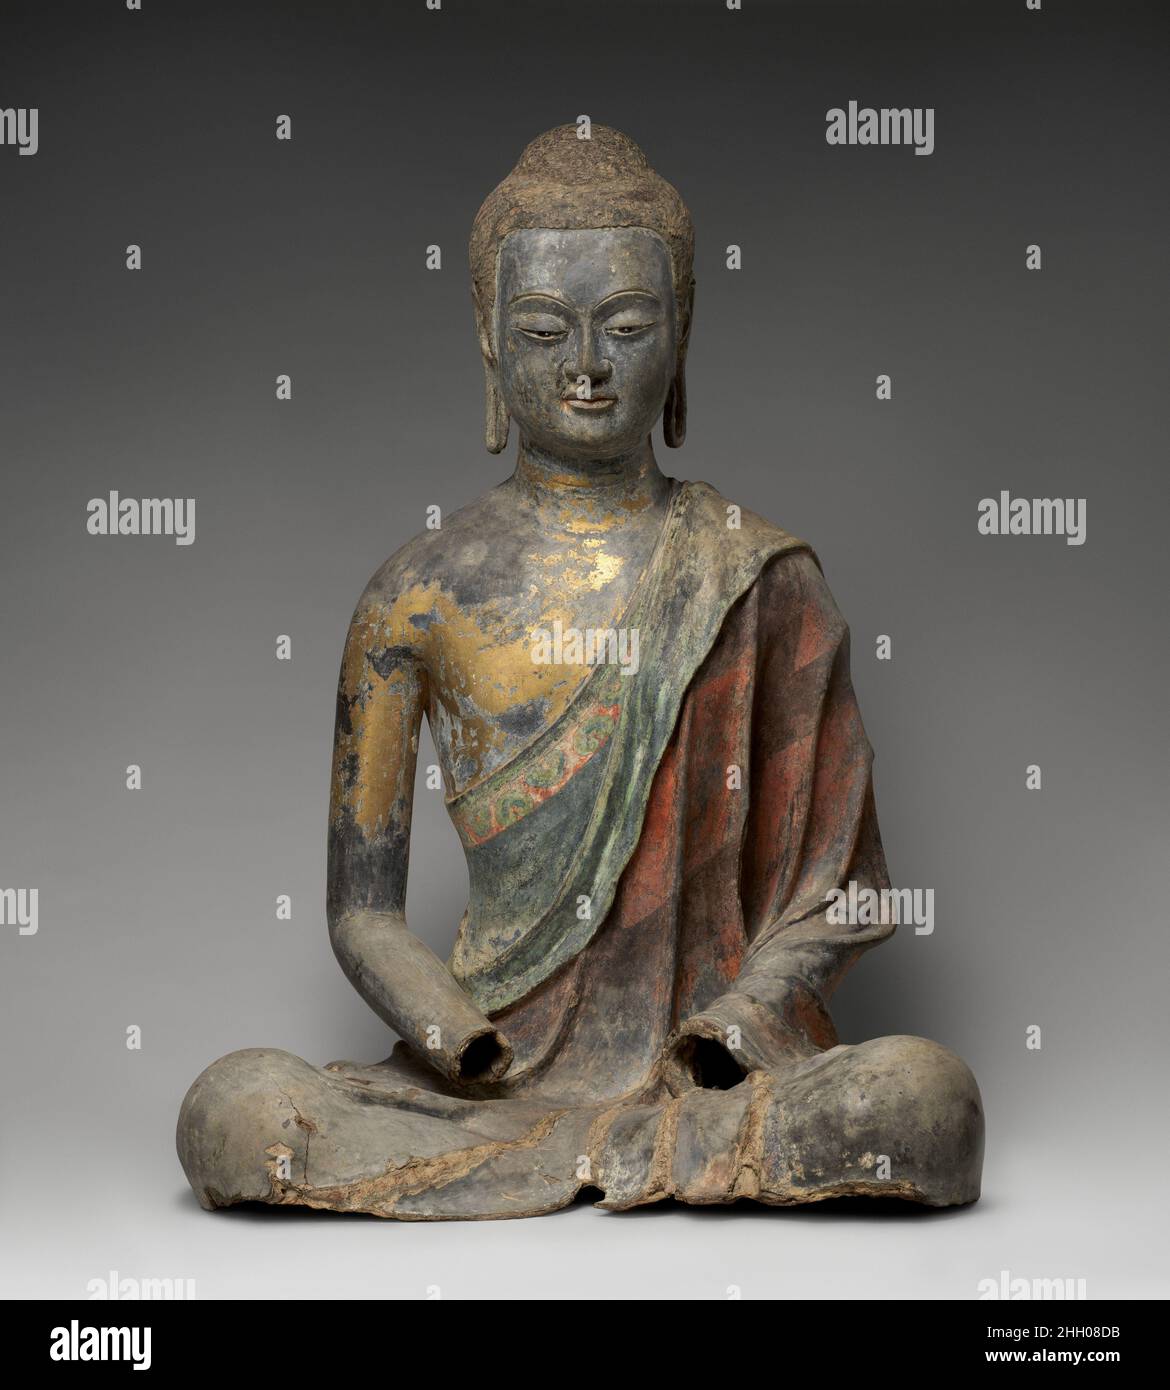 Buddha, Probably Amitabha early 7th century China The position of the Buddha’s arms indicates that the hands were once held in a gesture of meditation and suggests that this sculpture represents Amitabha, a celestial Buddha who presides over his Western Paradise. Devotion to Amitabha, a major component of Chinese Buddhist practice since the sixth century, promotes the goal of rebirth in Amitabha’s Pure Land, where conditions are conducive to achieving spiritual understanding. The sculpture was made using the dry-lacquer technique, in which a core (often made of wood) is covered with clay and t Stock Photo